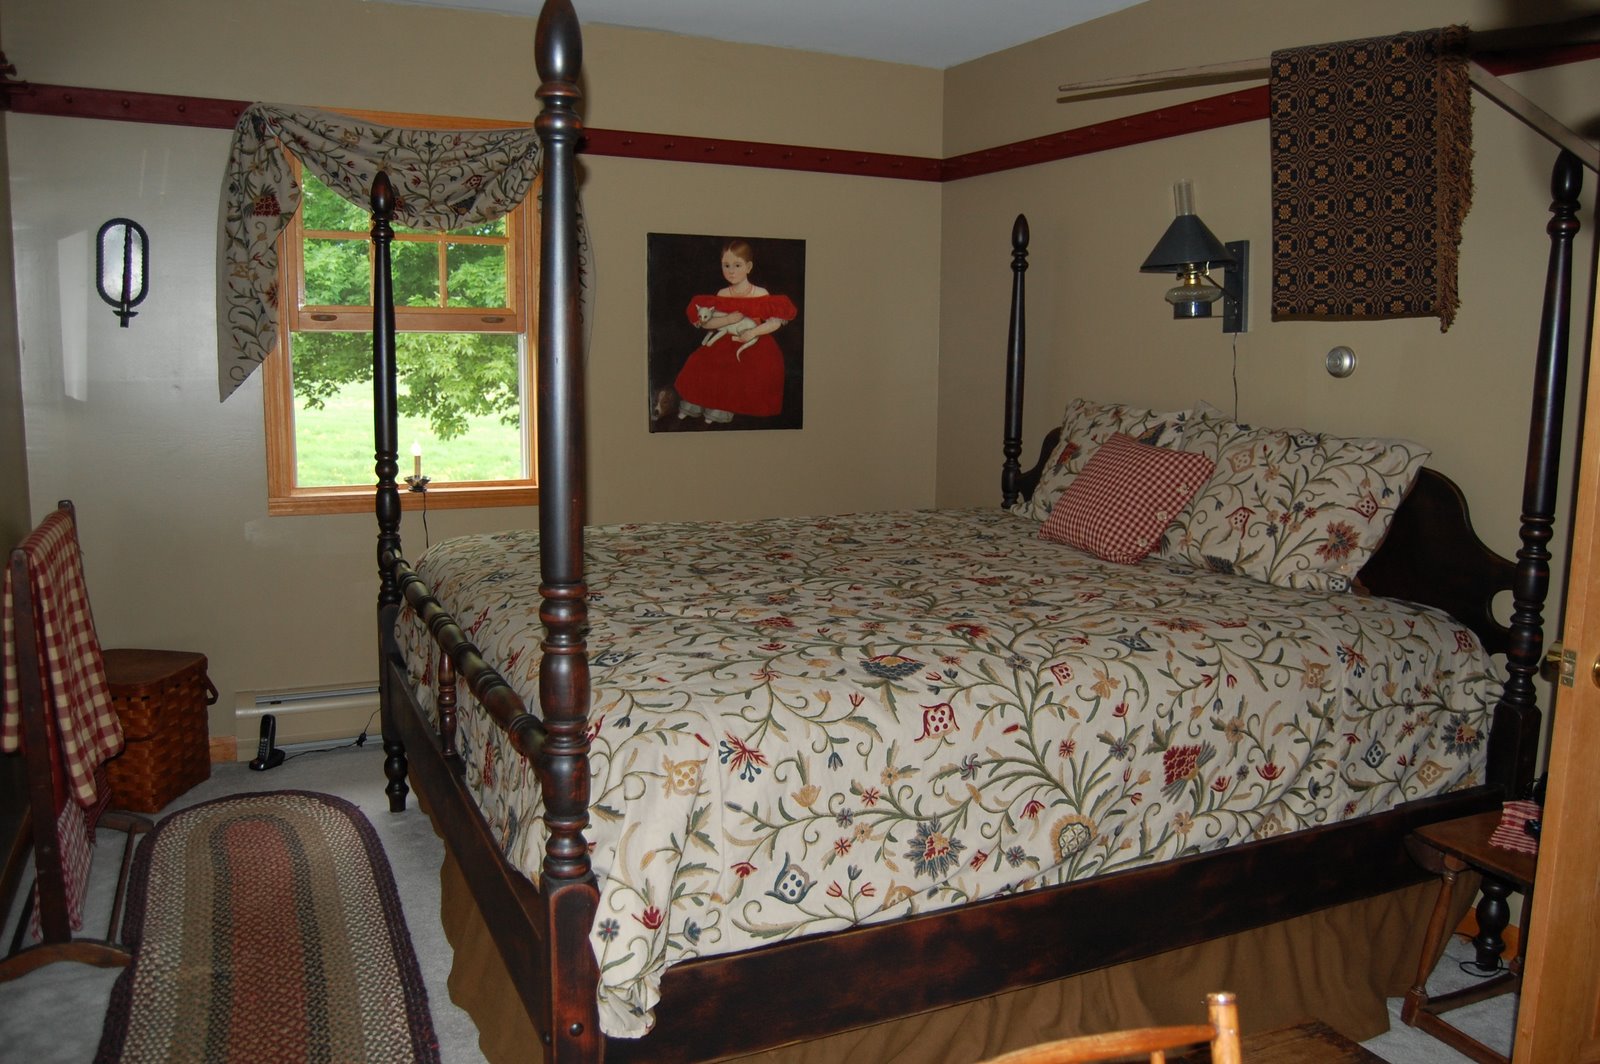  Poster Beds Furniture on American Furniture By Shaka Studios  Custom Four Poster Bed